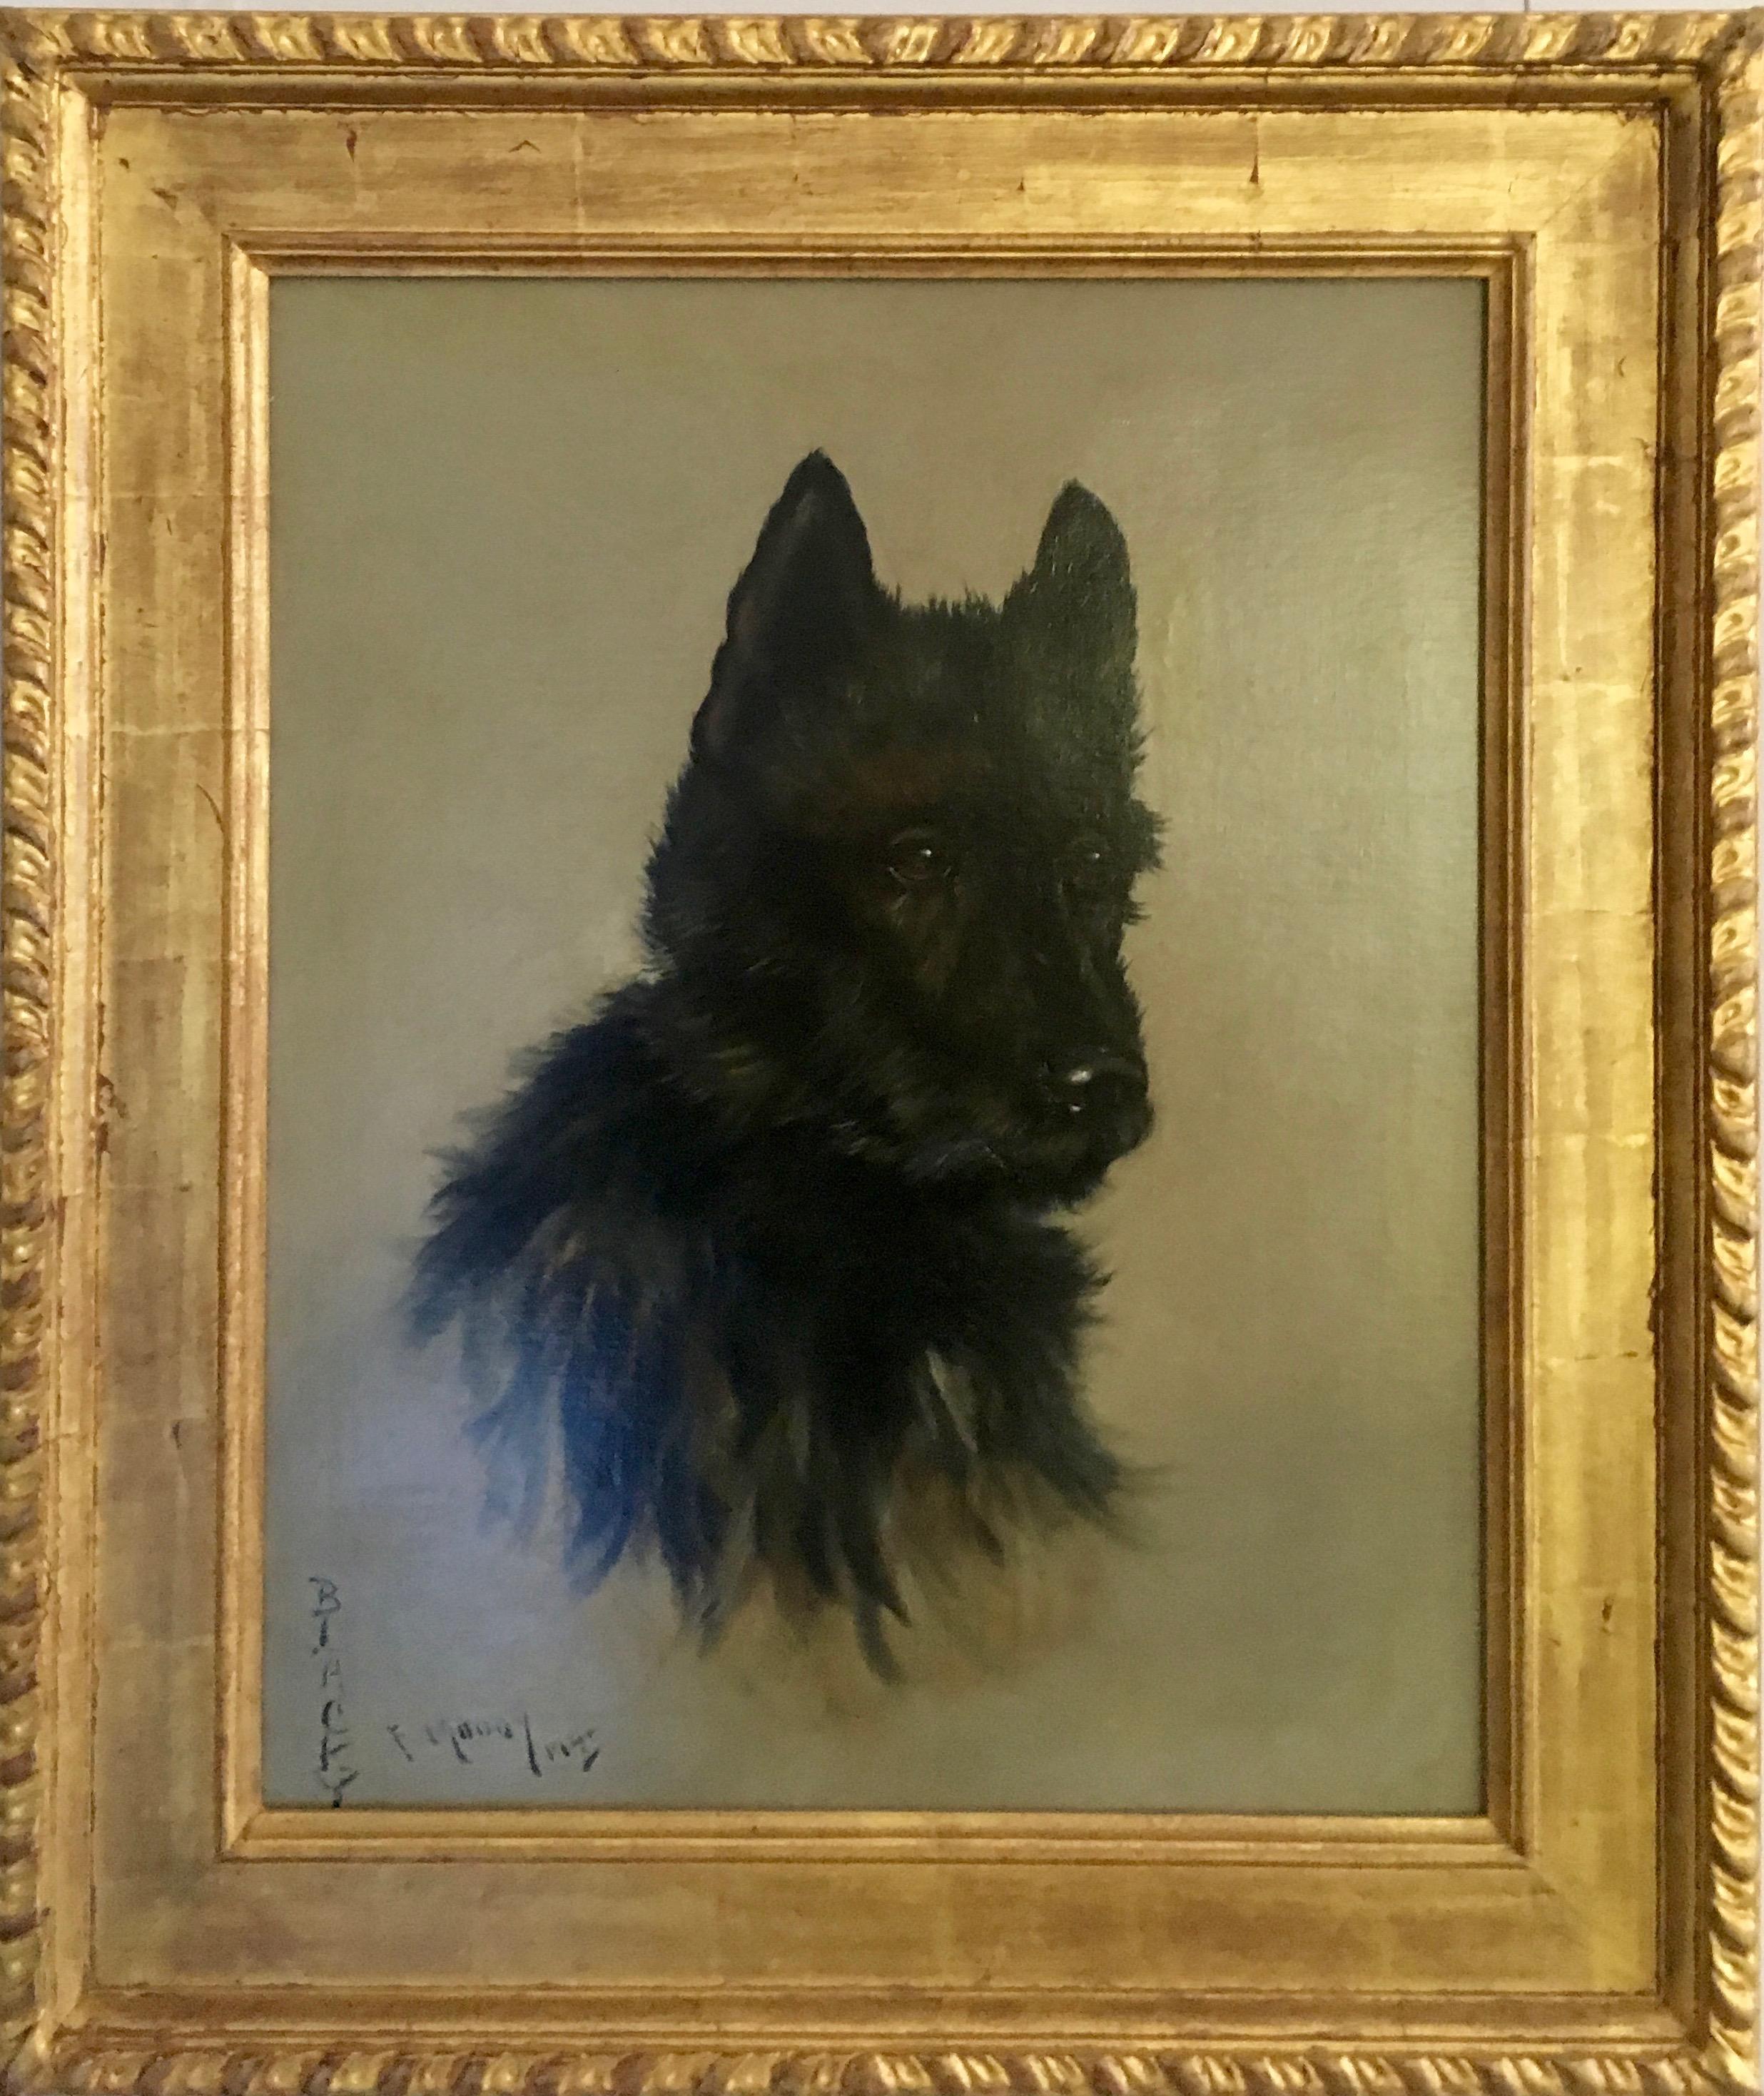 Victorian English Portrait of a Scottie dog or puppy - Painting by Fanny Moody